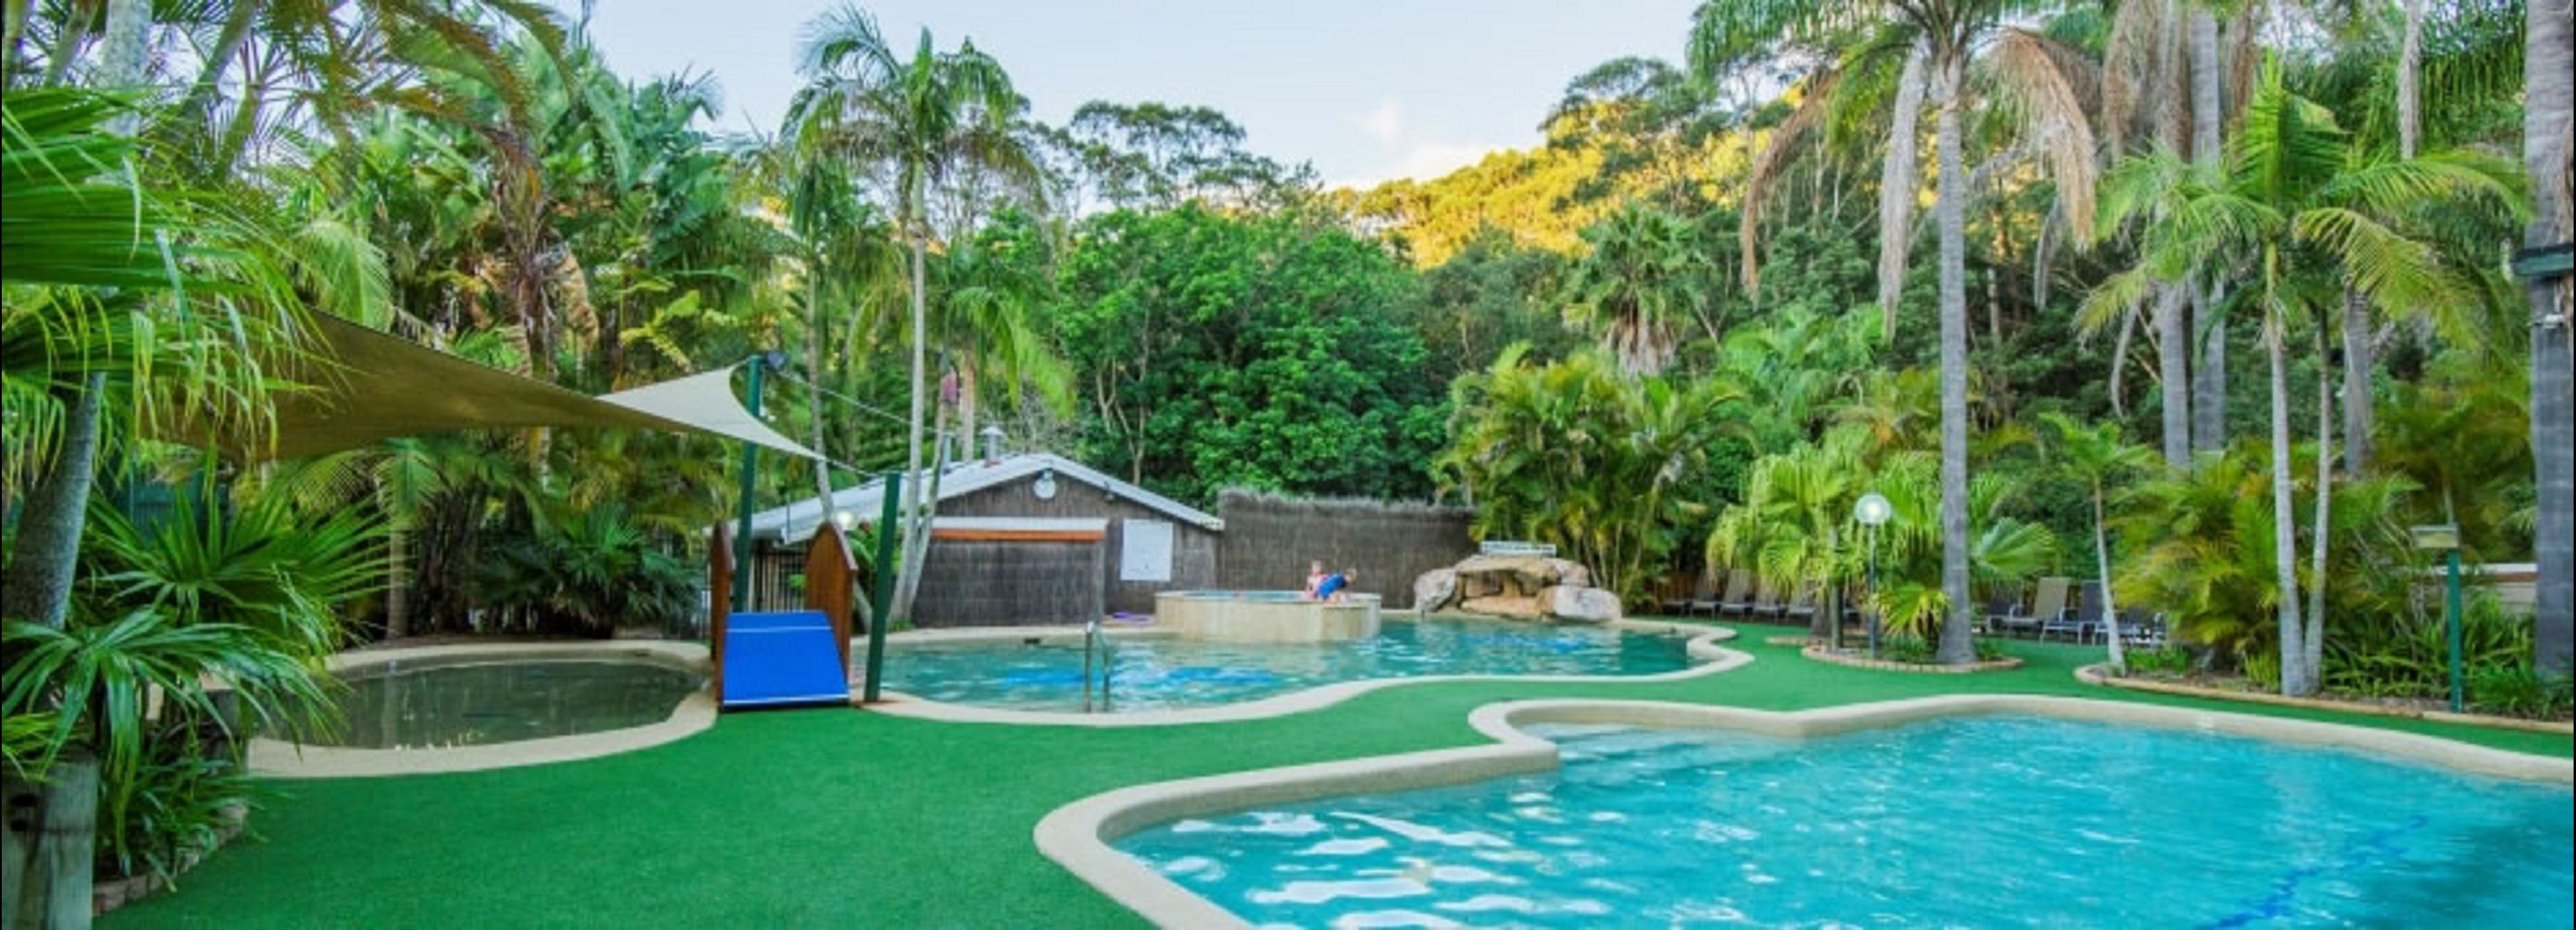 The Palms at Avoca - Accommodation in Brisbane